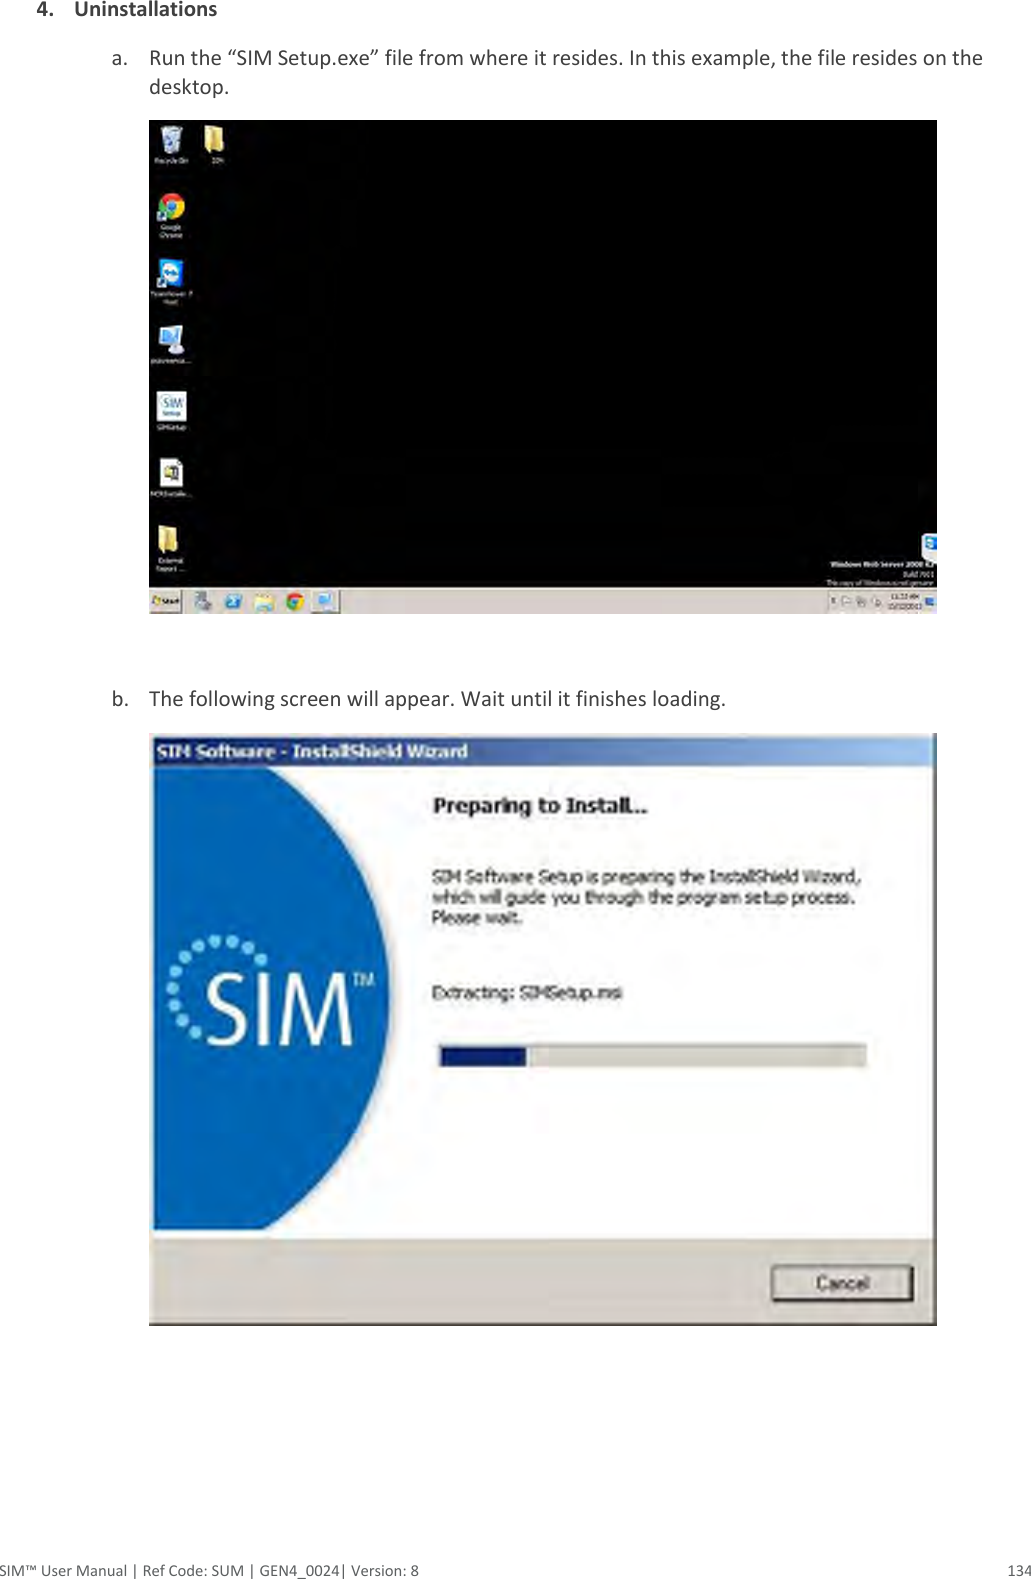  SIM™ User Manual | Ref Code: SUM | GEN4_0024| Version: 8  134 4. Uninstallations a. Run the “SIM Setup.exe” file from where it resides. In this example, the file resides on the desktop.   b. The following screen will appear. Wait until it finishes loading.      